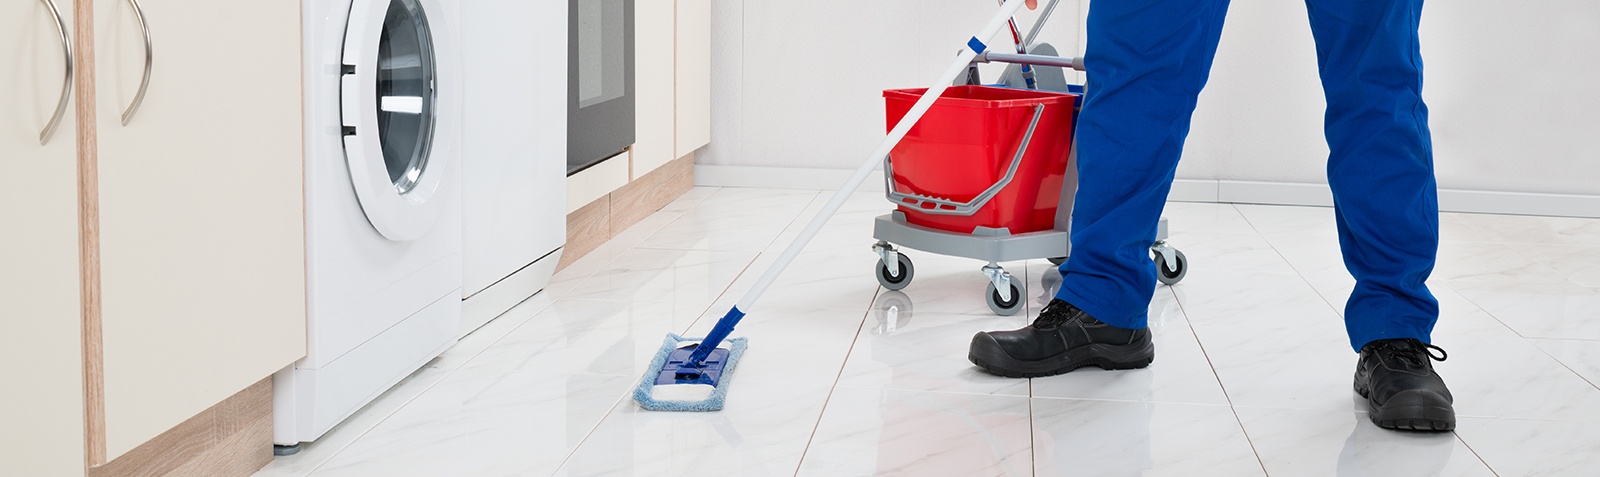  Reliable Commercial/ Office Cleaners serving Surrey, BC